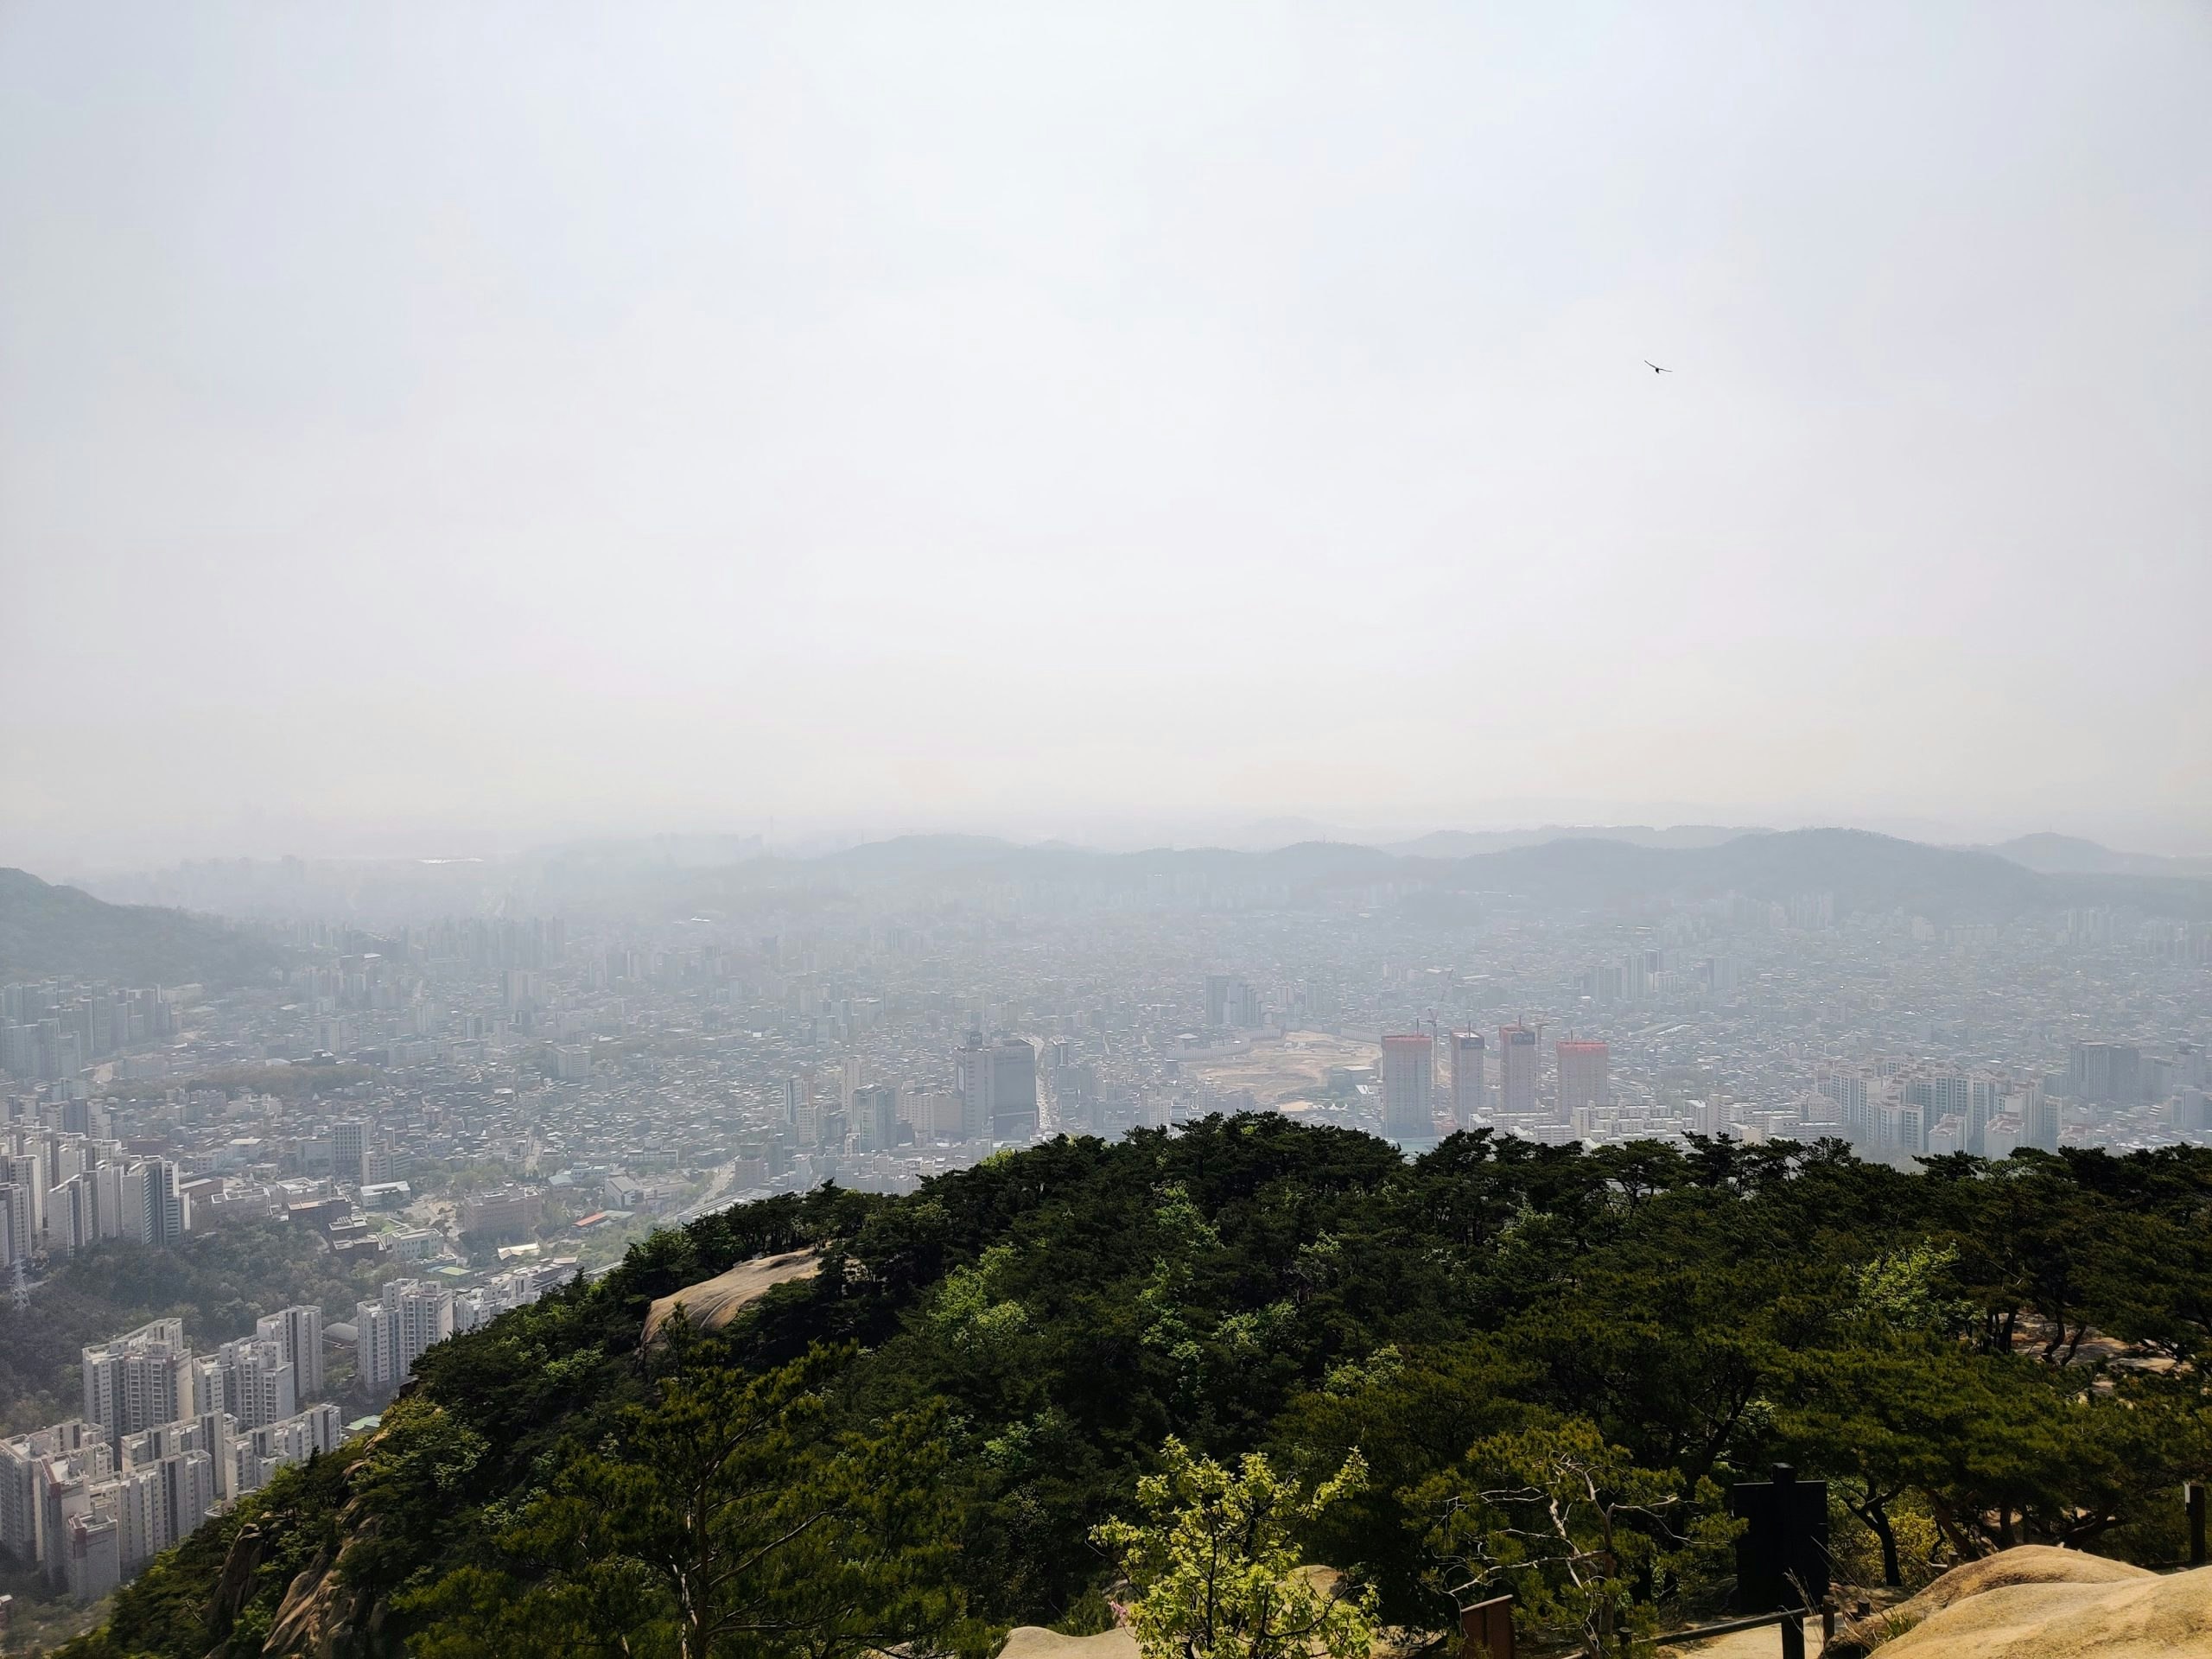 Solutions From Seoul: Jaeyong Sung's Climate Leaders Fellowship Project